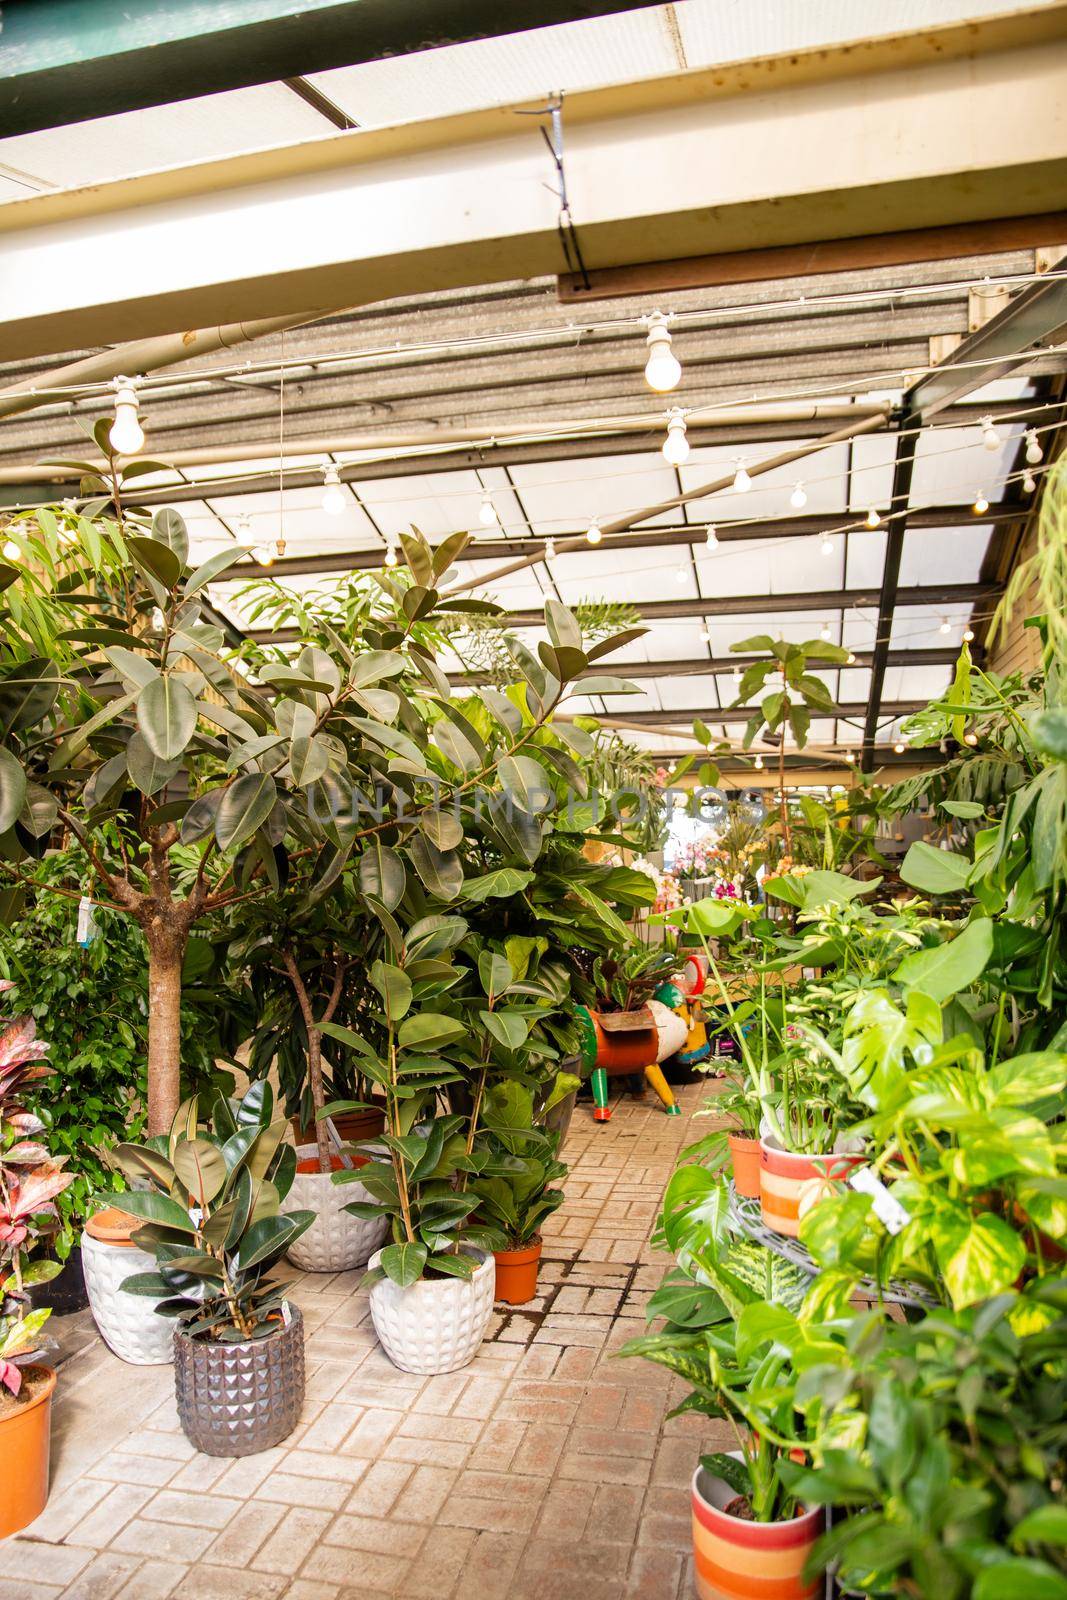 Display of plants and small trees inside shop with low glass ceiling. Variety of fresh plants on ceramic and clay pots for sale inside store. Houseplants and nature